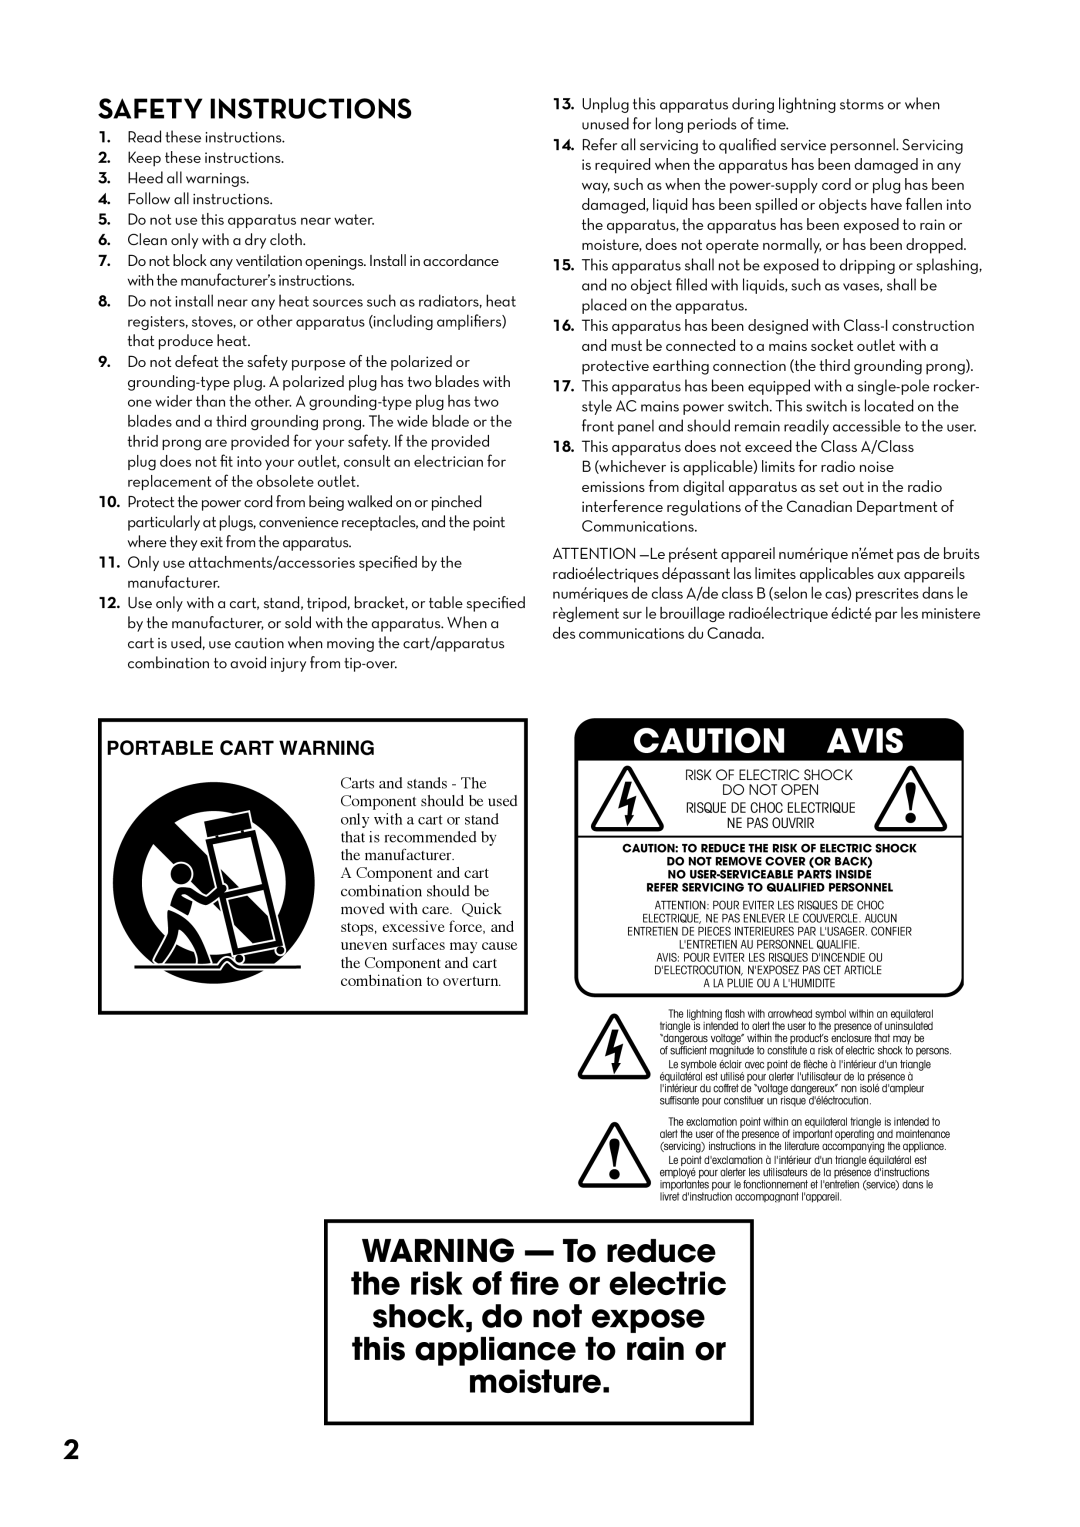 Tapco pmn manual Safety Instructions, Caution Avis, Portable Cart Warning 